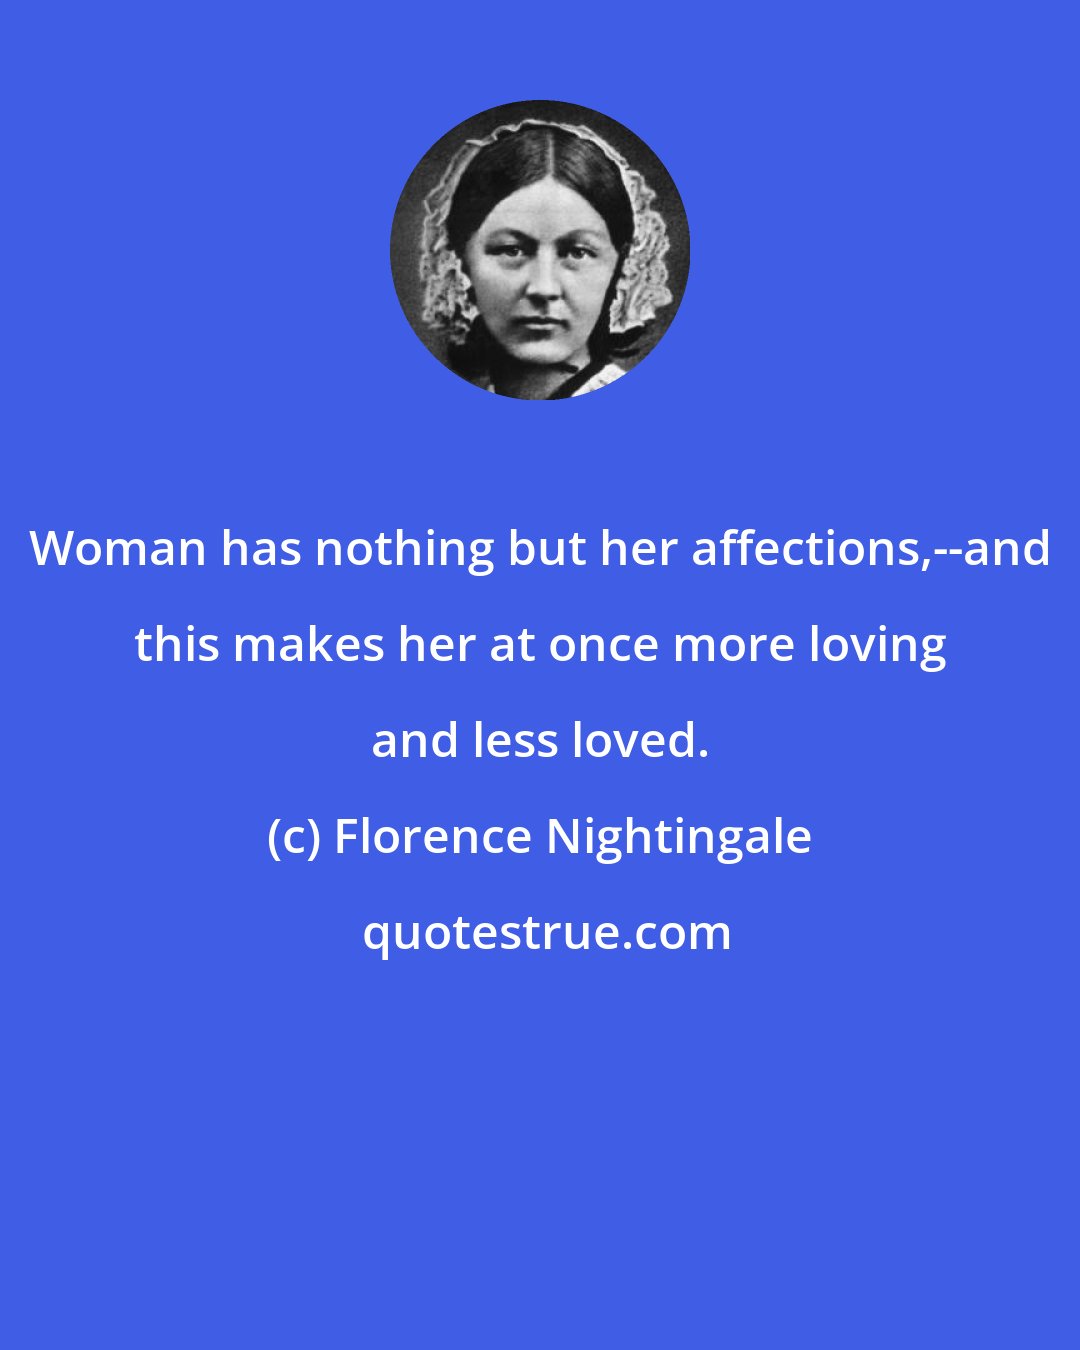 Florence Nightingale: Woman has nothing but her affections,--and this makes her at once more loving and less loved.